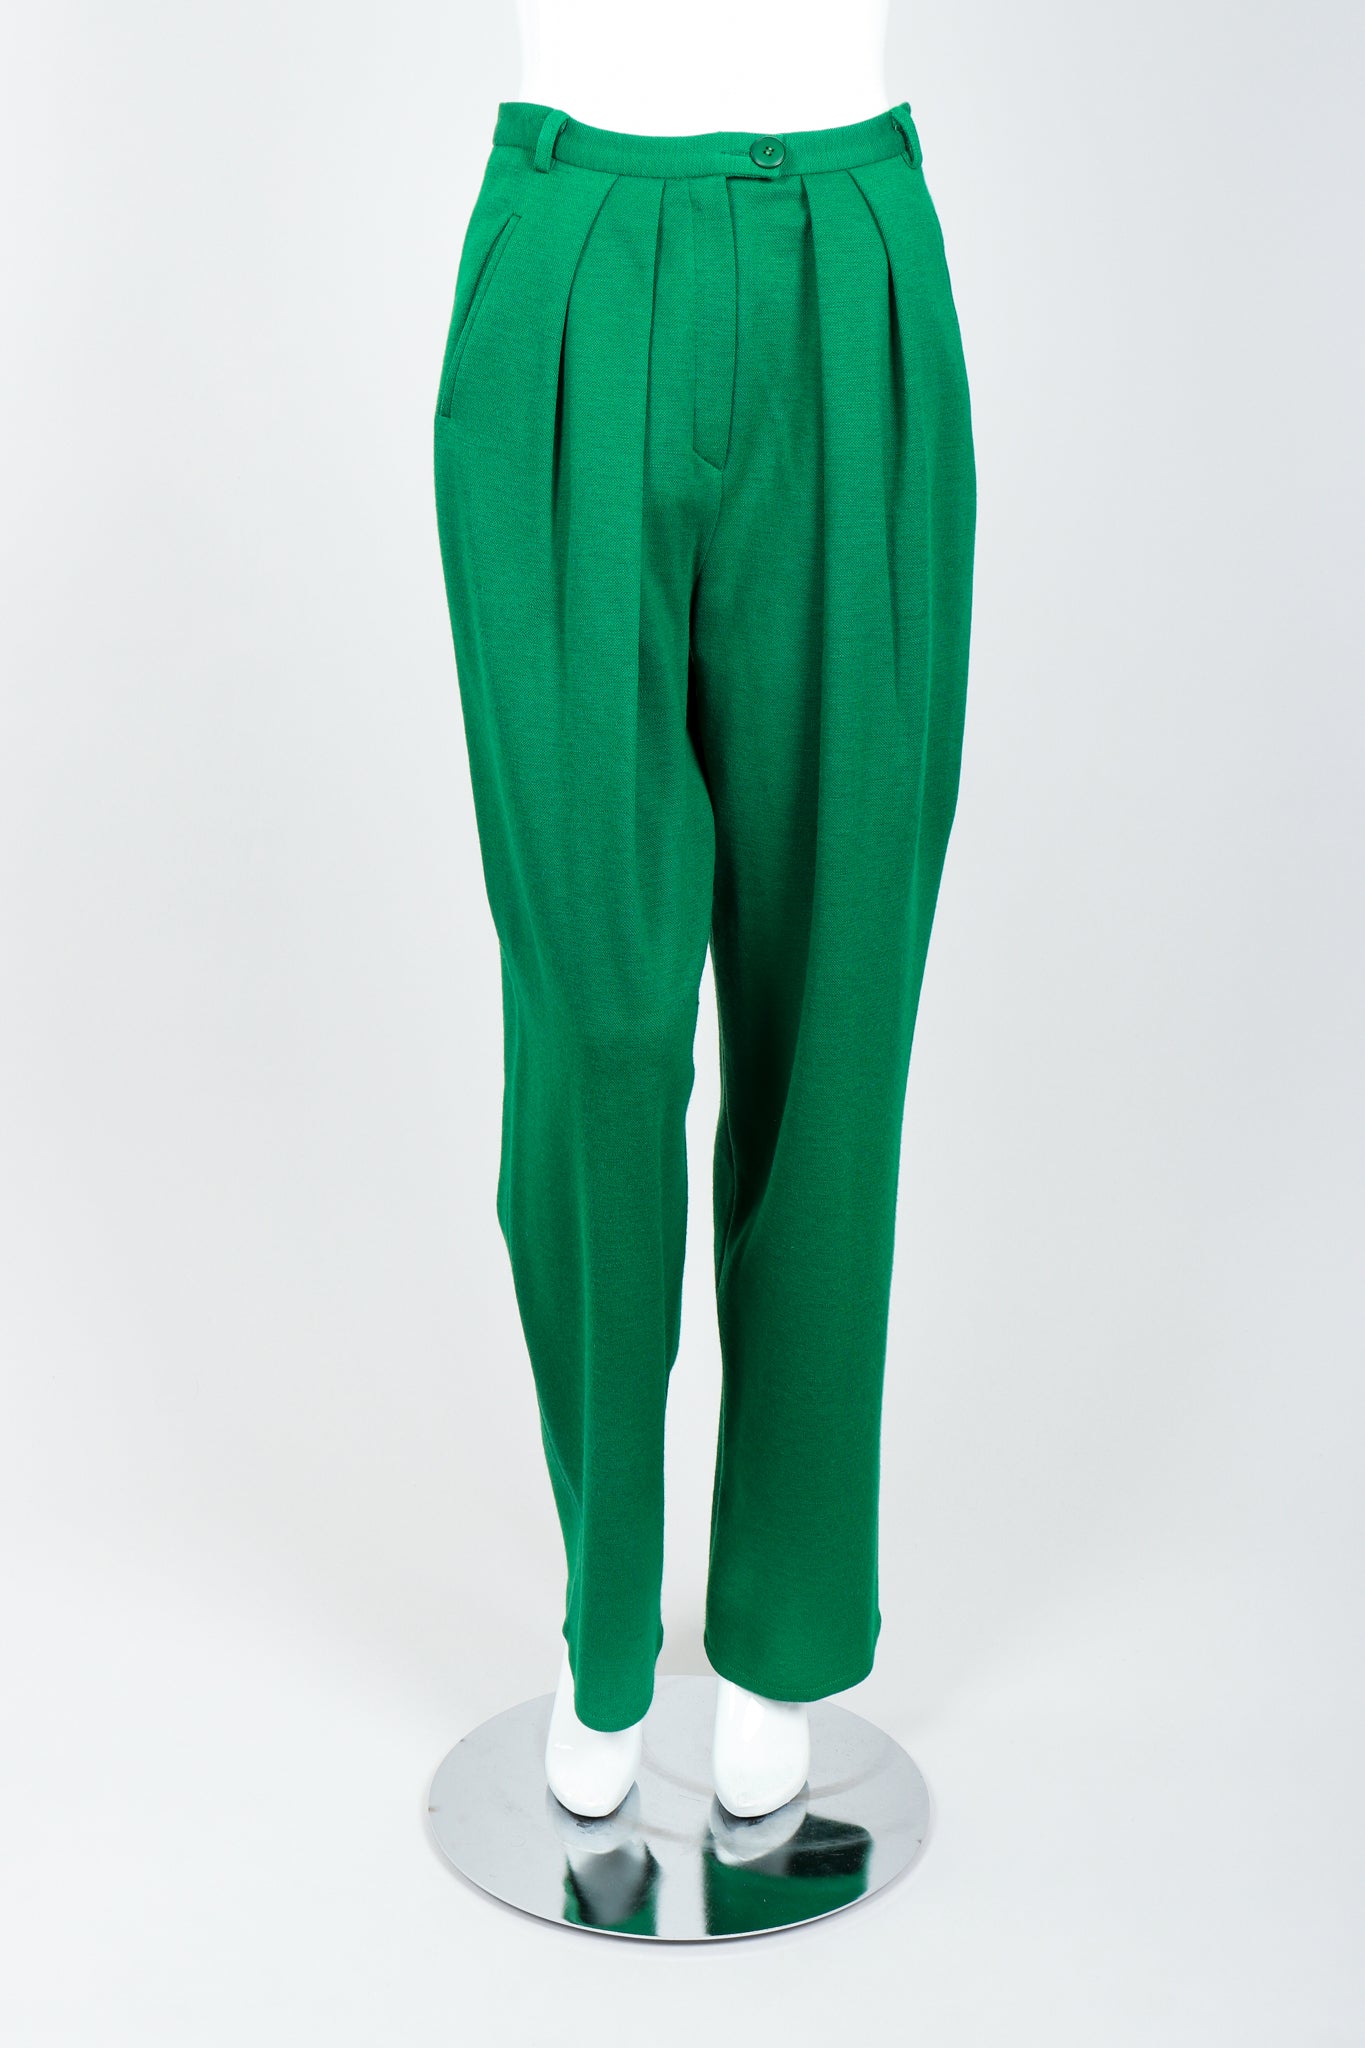 Vintage Sonia Rykiel Green Collegiate Knit Pant Set on Mannequin Front at Recess